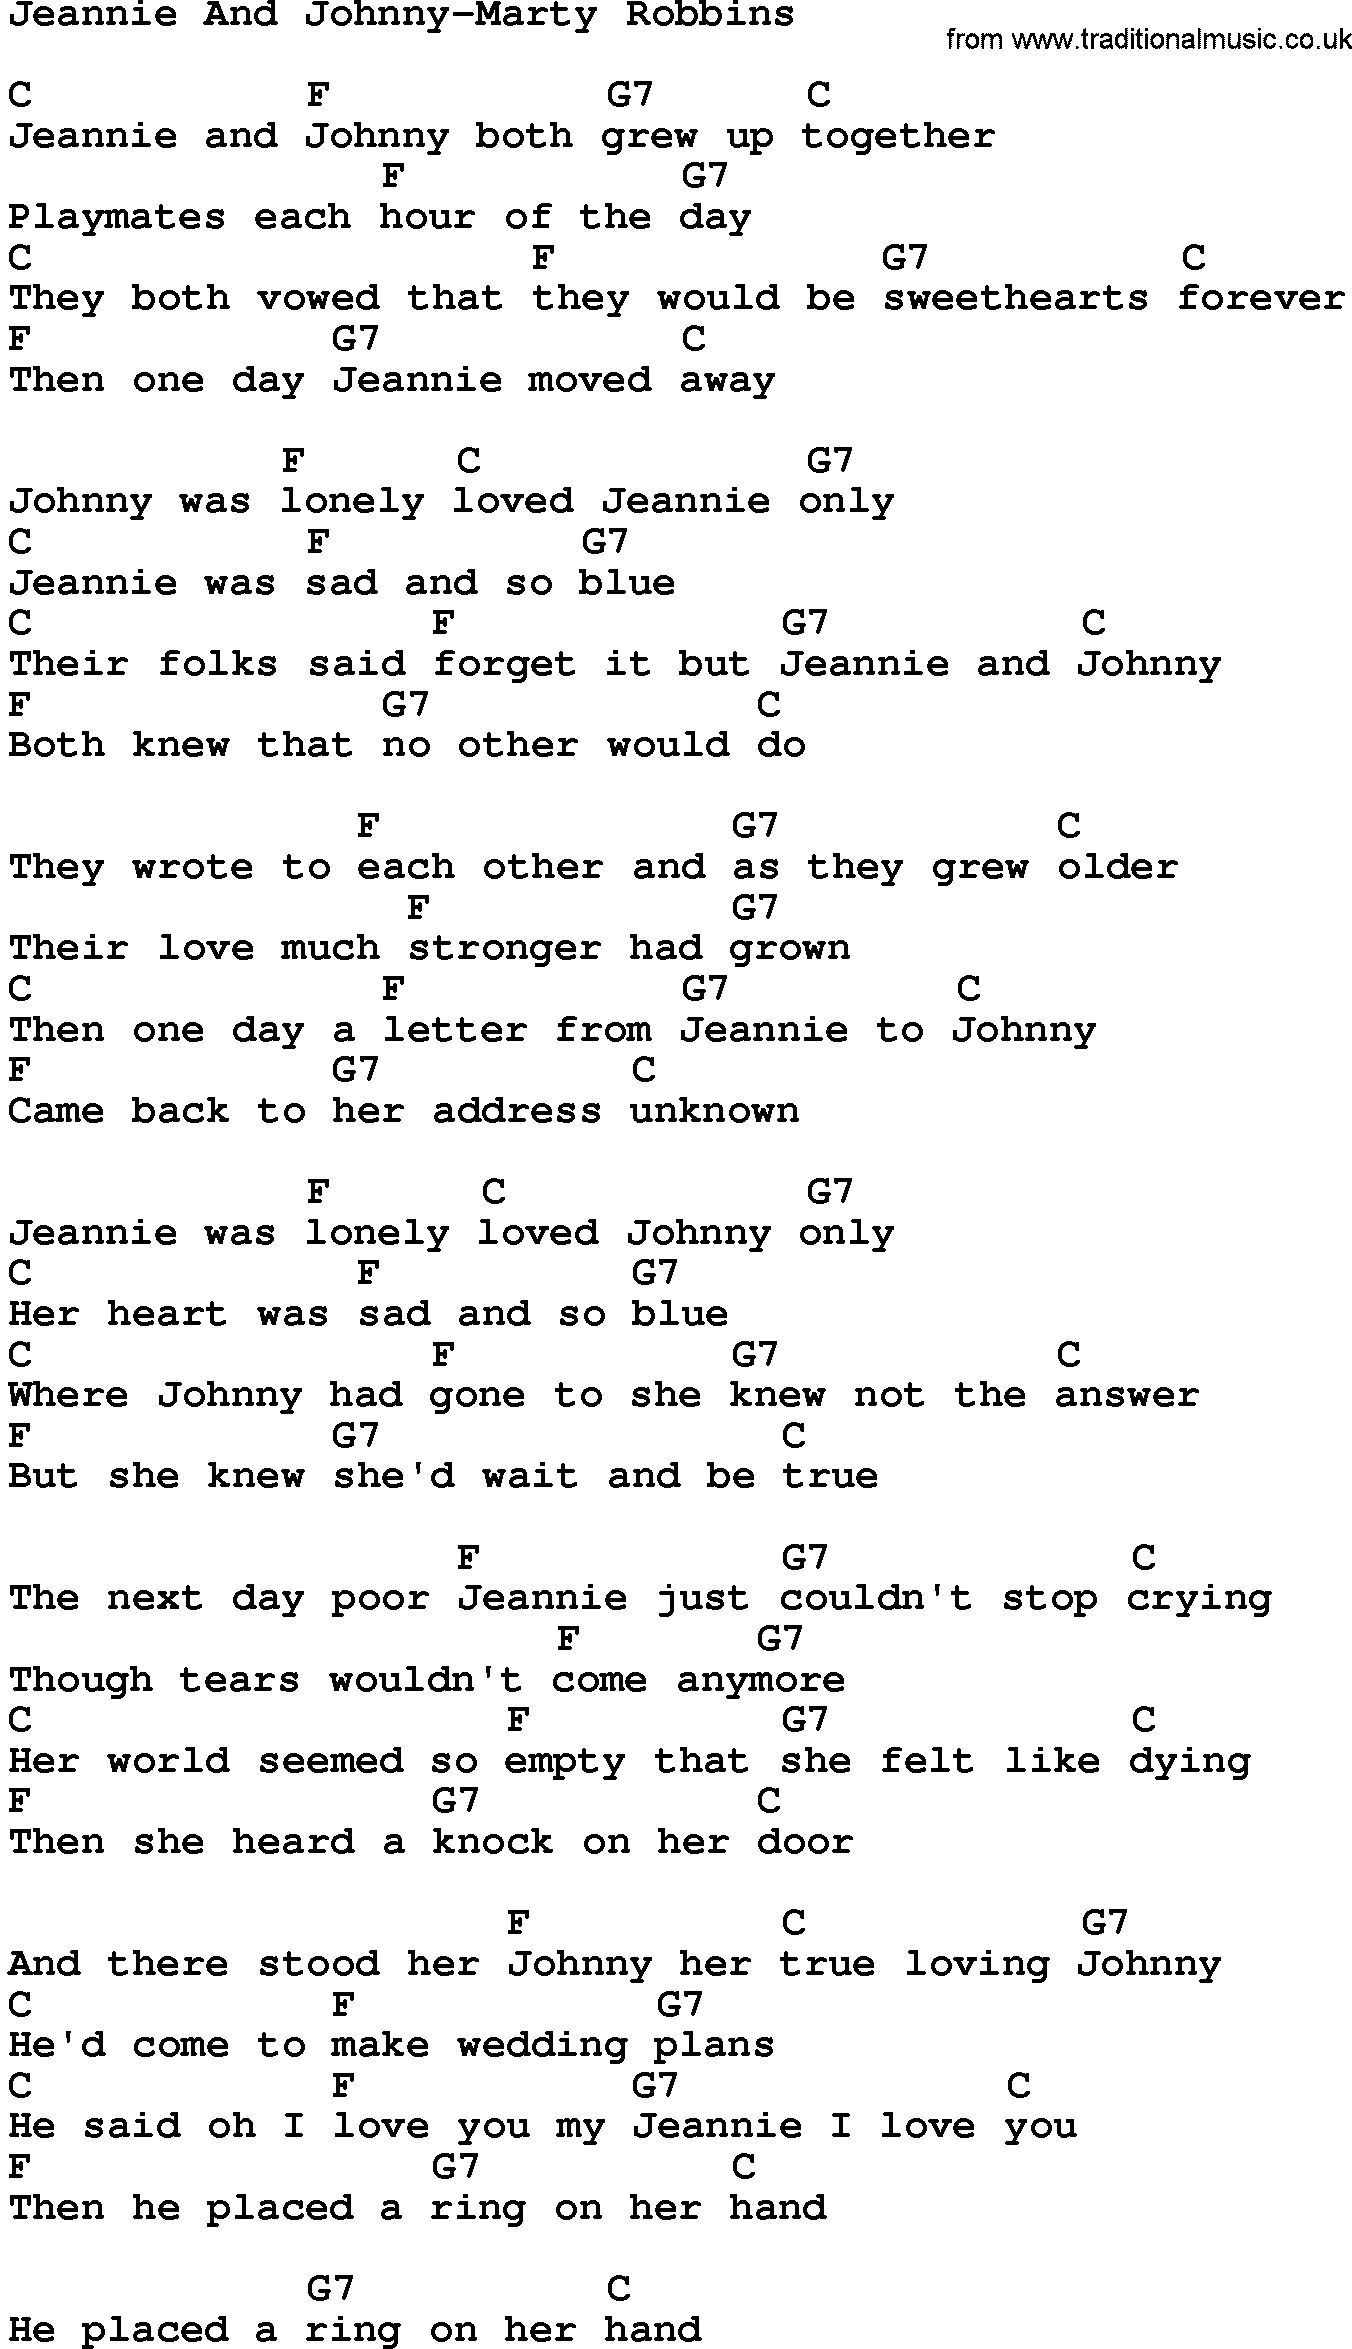 Country music song: Jeannie And Johnny-Marty Robbins lyrics and chords